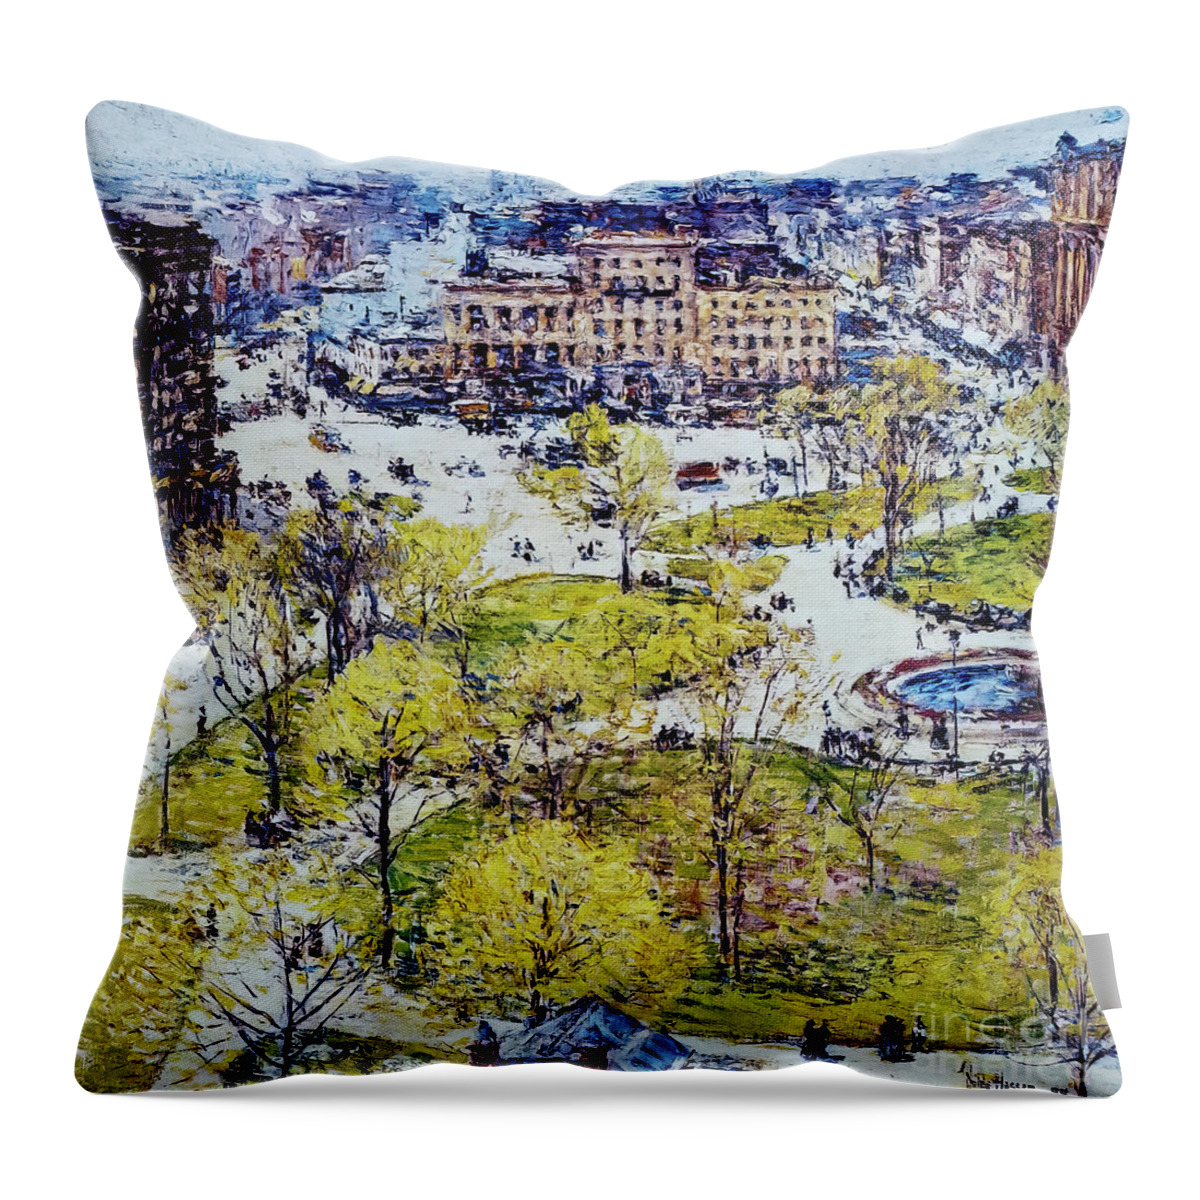 Union Throw Pillow featuring the painting Union Square in Spring by Childe Hassam 1896 by Childe Hassam